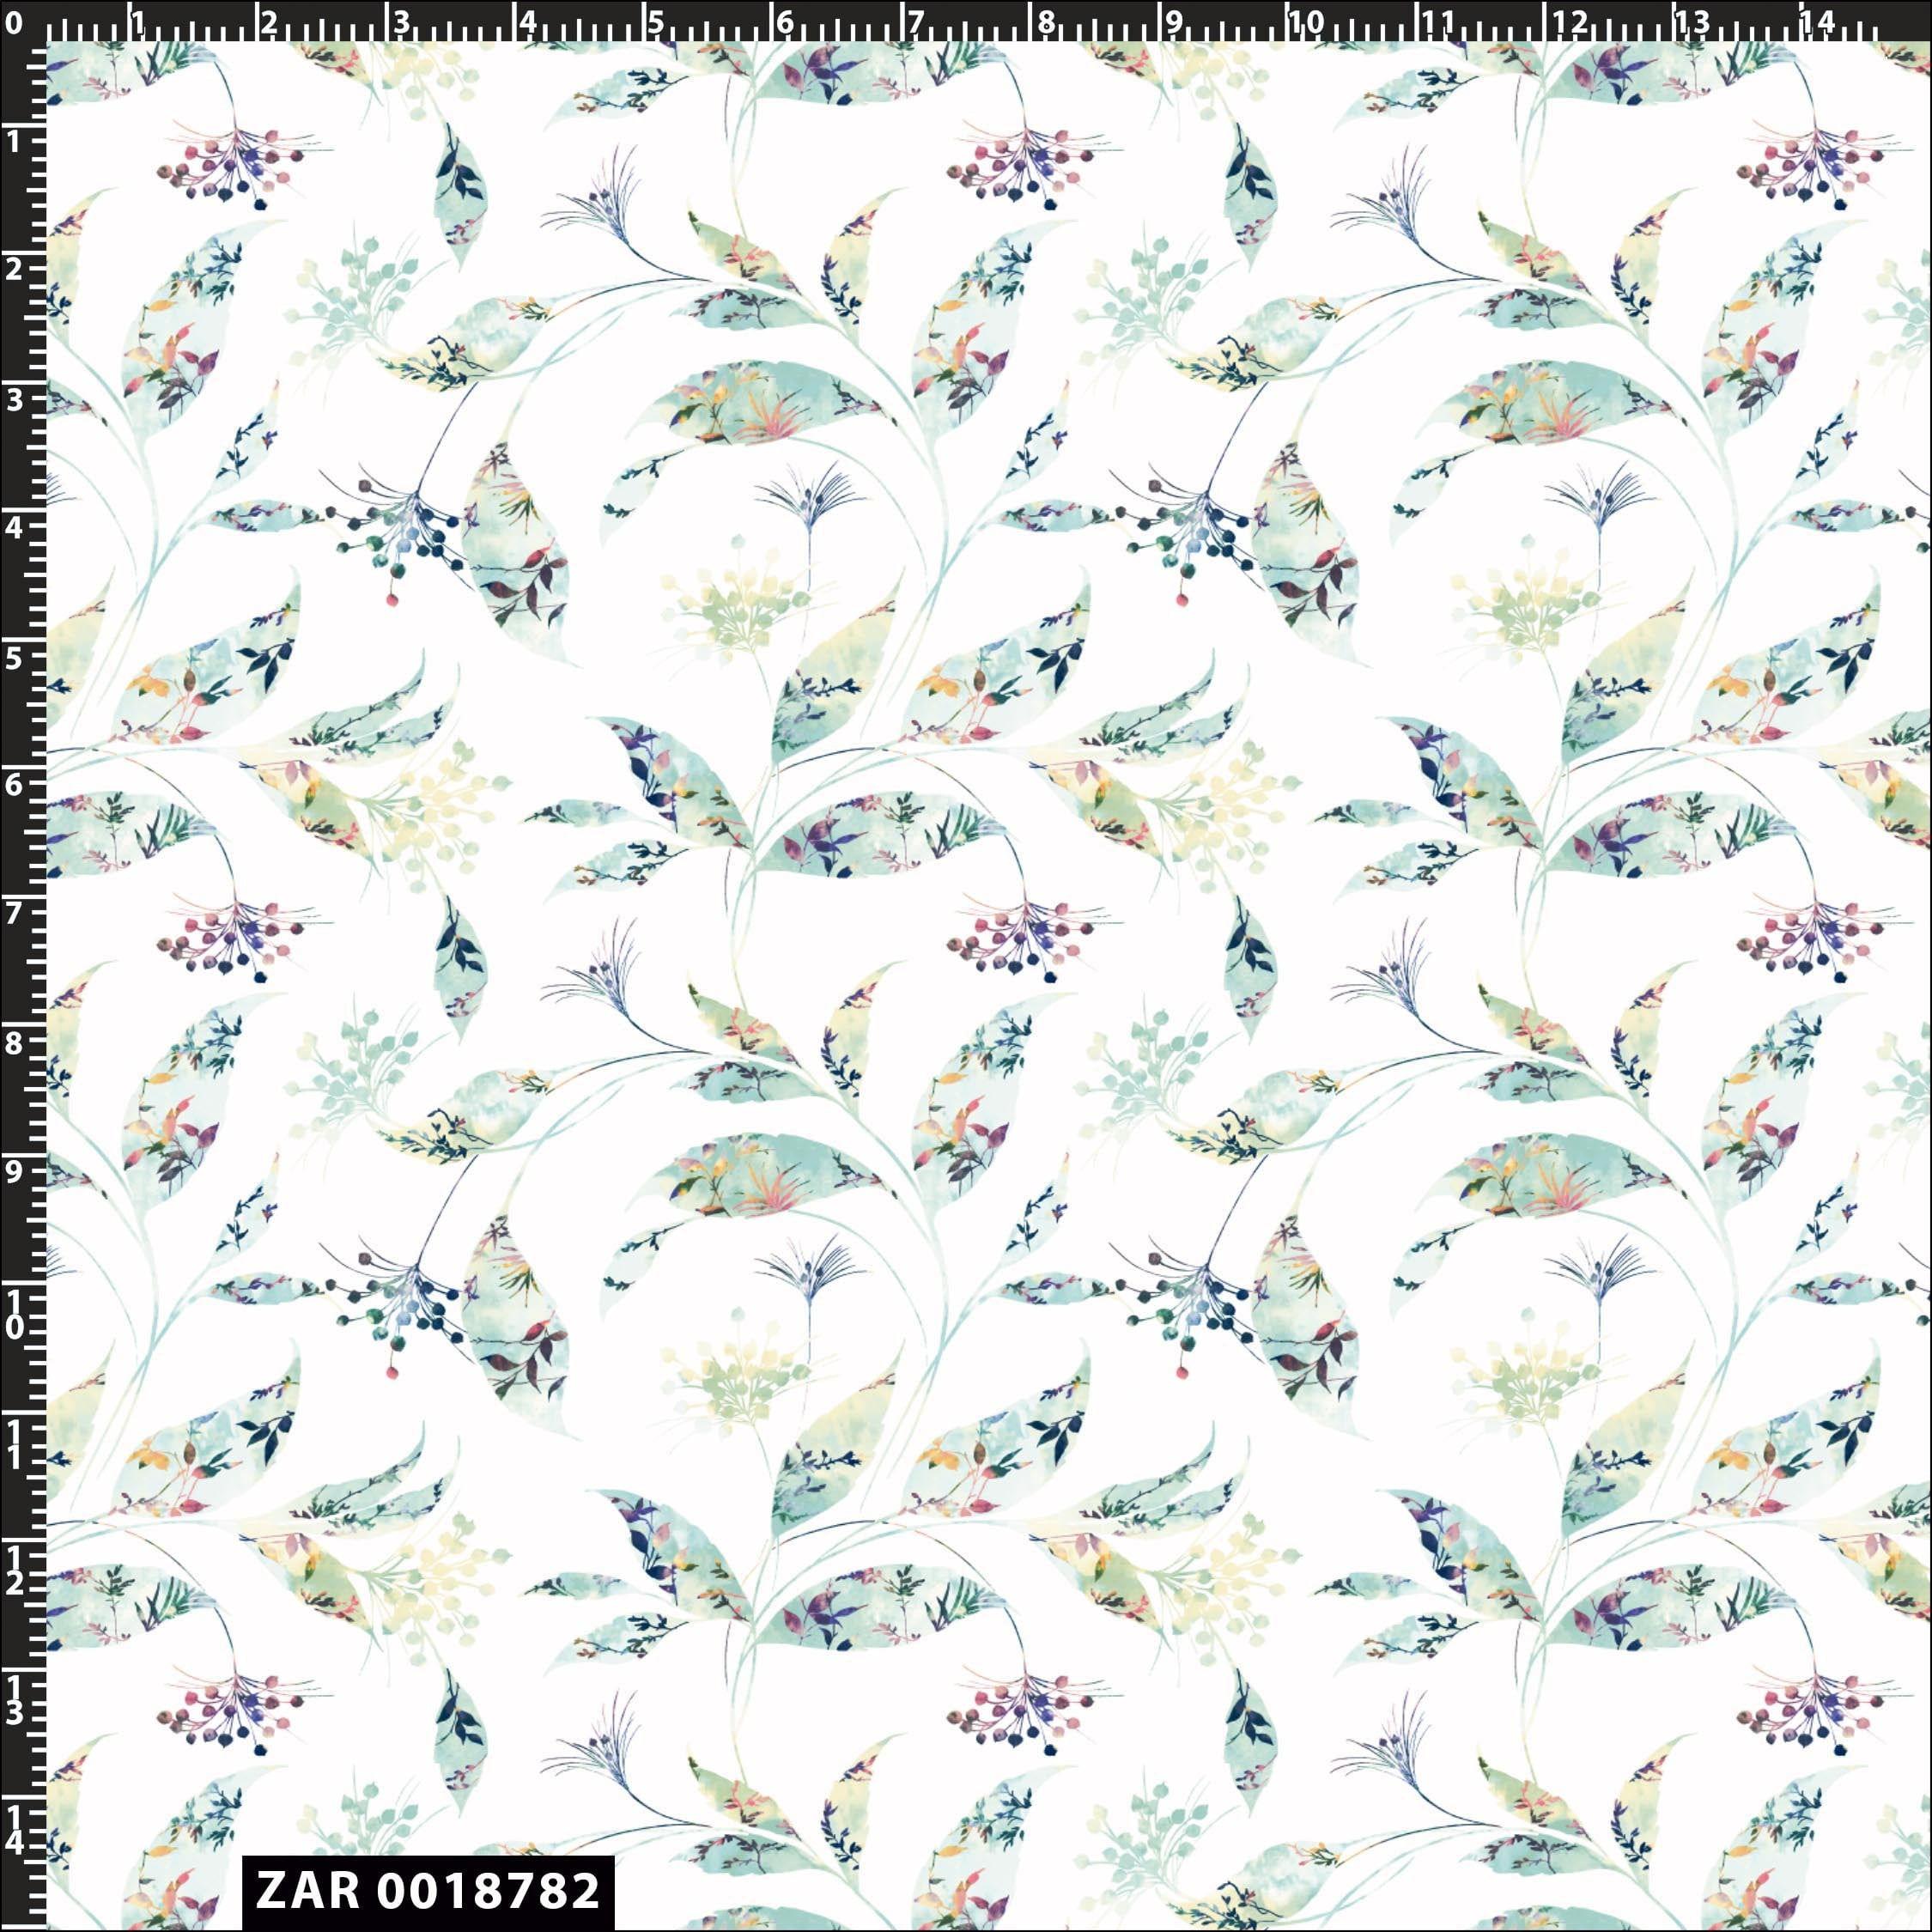 Ivory, Mint, Navy, Vanilla and Purple Style CQ-93 Seamless Dream Floral Pattern 100% Cotton Quilting Fabric by the Yard